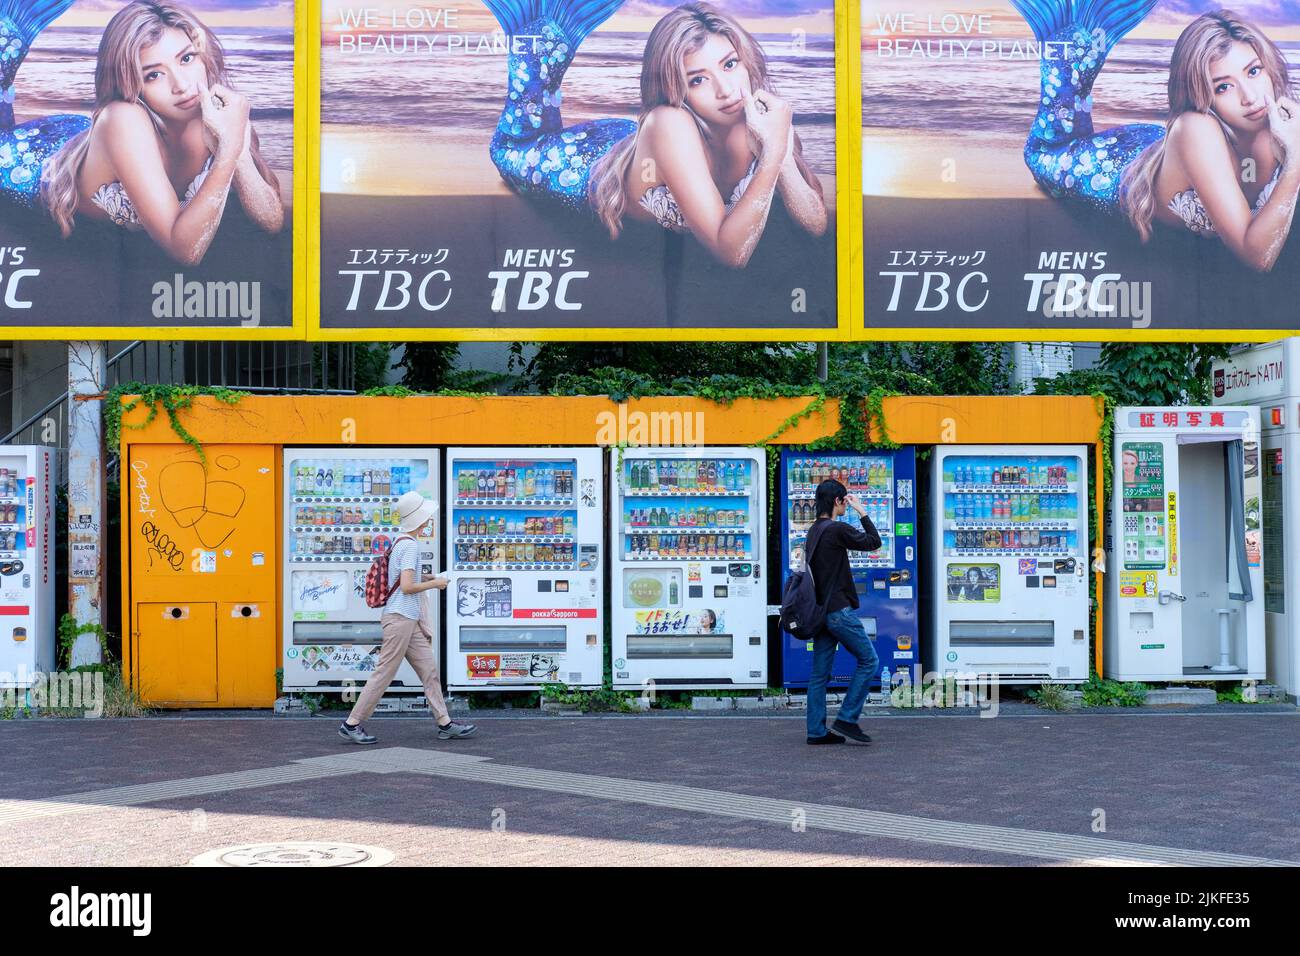 TOKYO, JAPAN - AUGUST 4, 2019: People pass by a collection of typically Japanese vending machines and billboards in Tokyo, Japan on August 4, 2019. Stock Photo